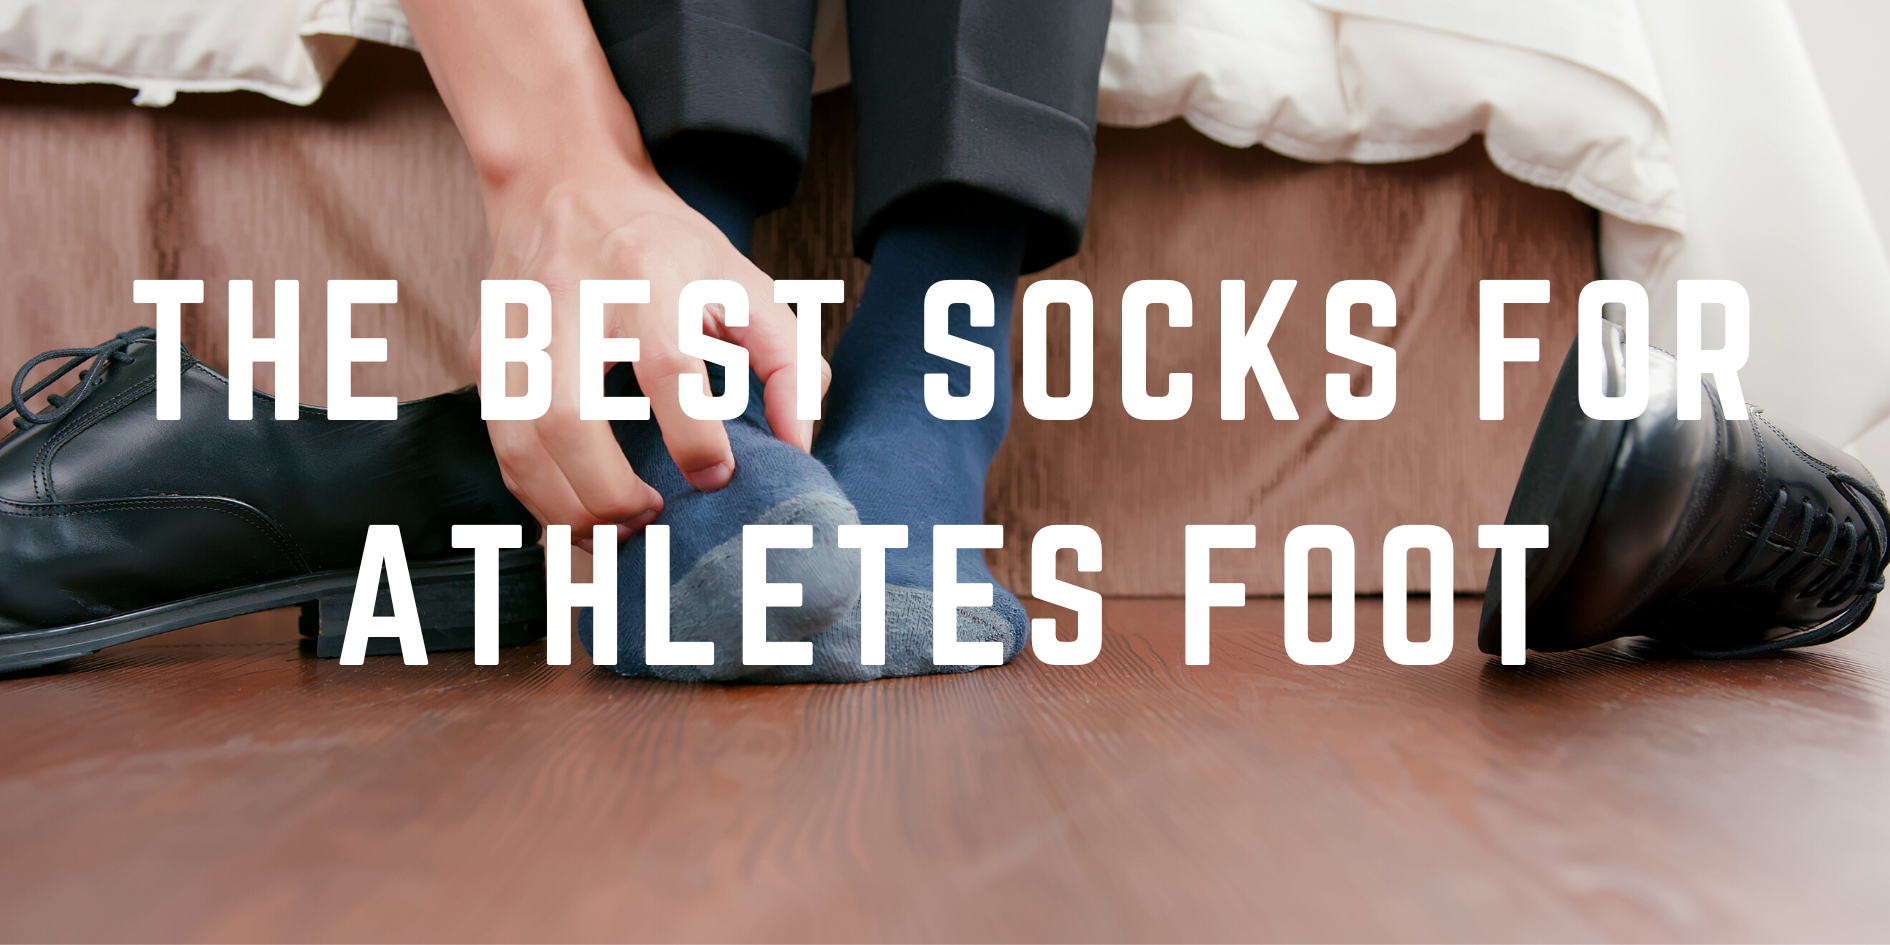 The Best Socks for Athletes Foot | Creepers Socks